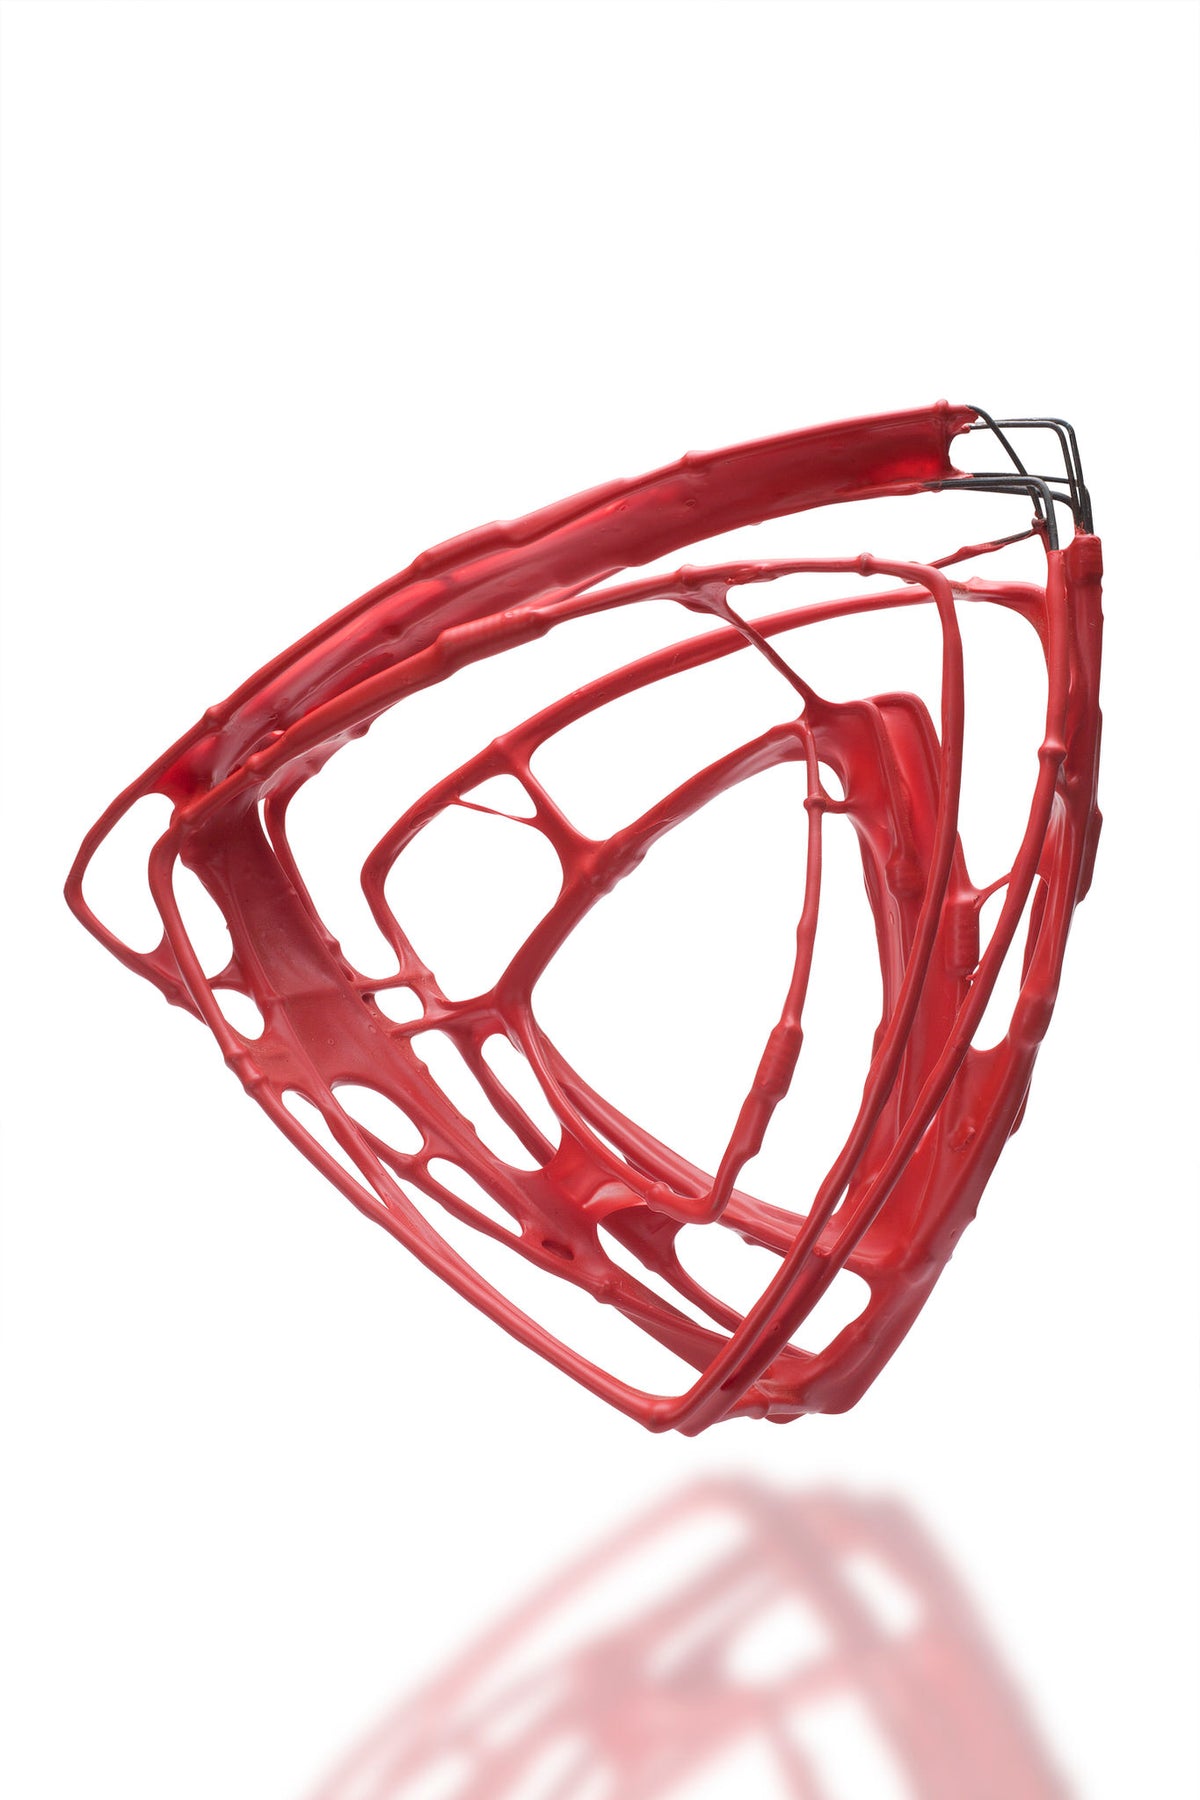 One-of-a-Kind Red Wire Bracelet